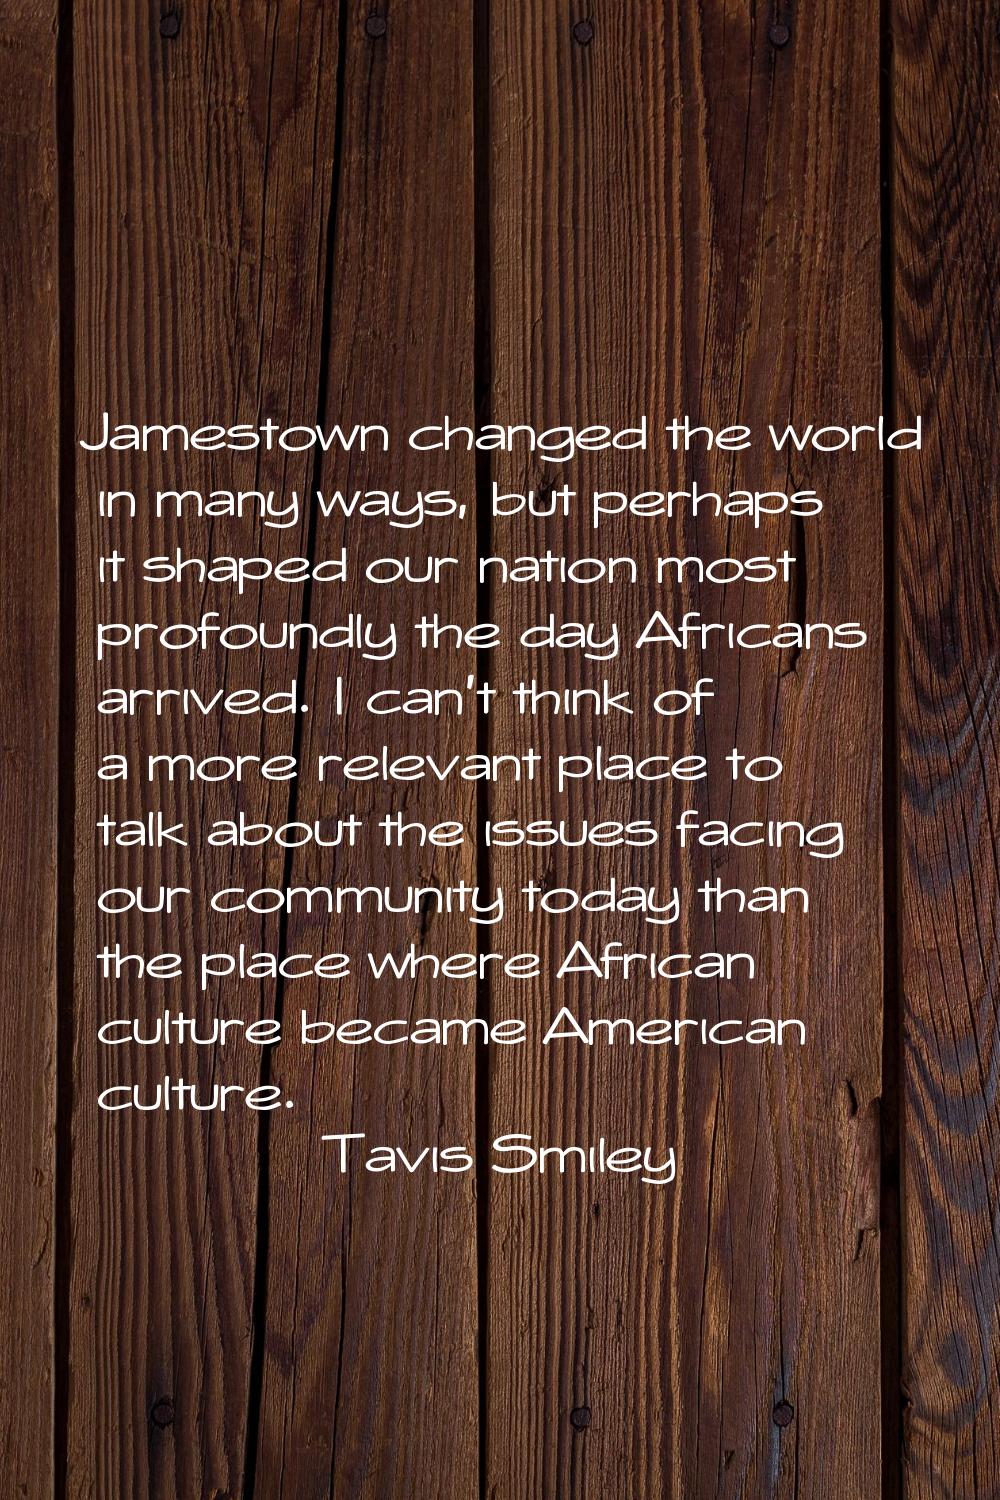 Jamestown changed the world in many ways, but perhaps it shaped our nation most profoundly the day 